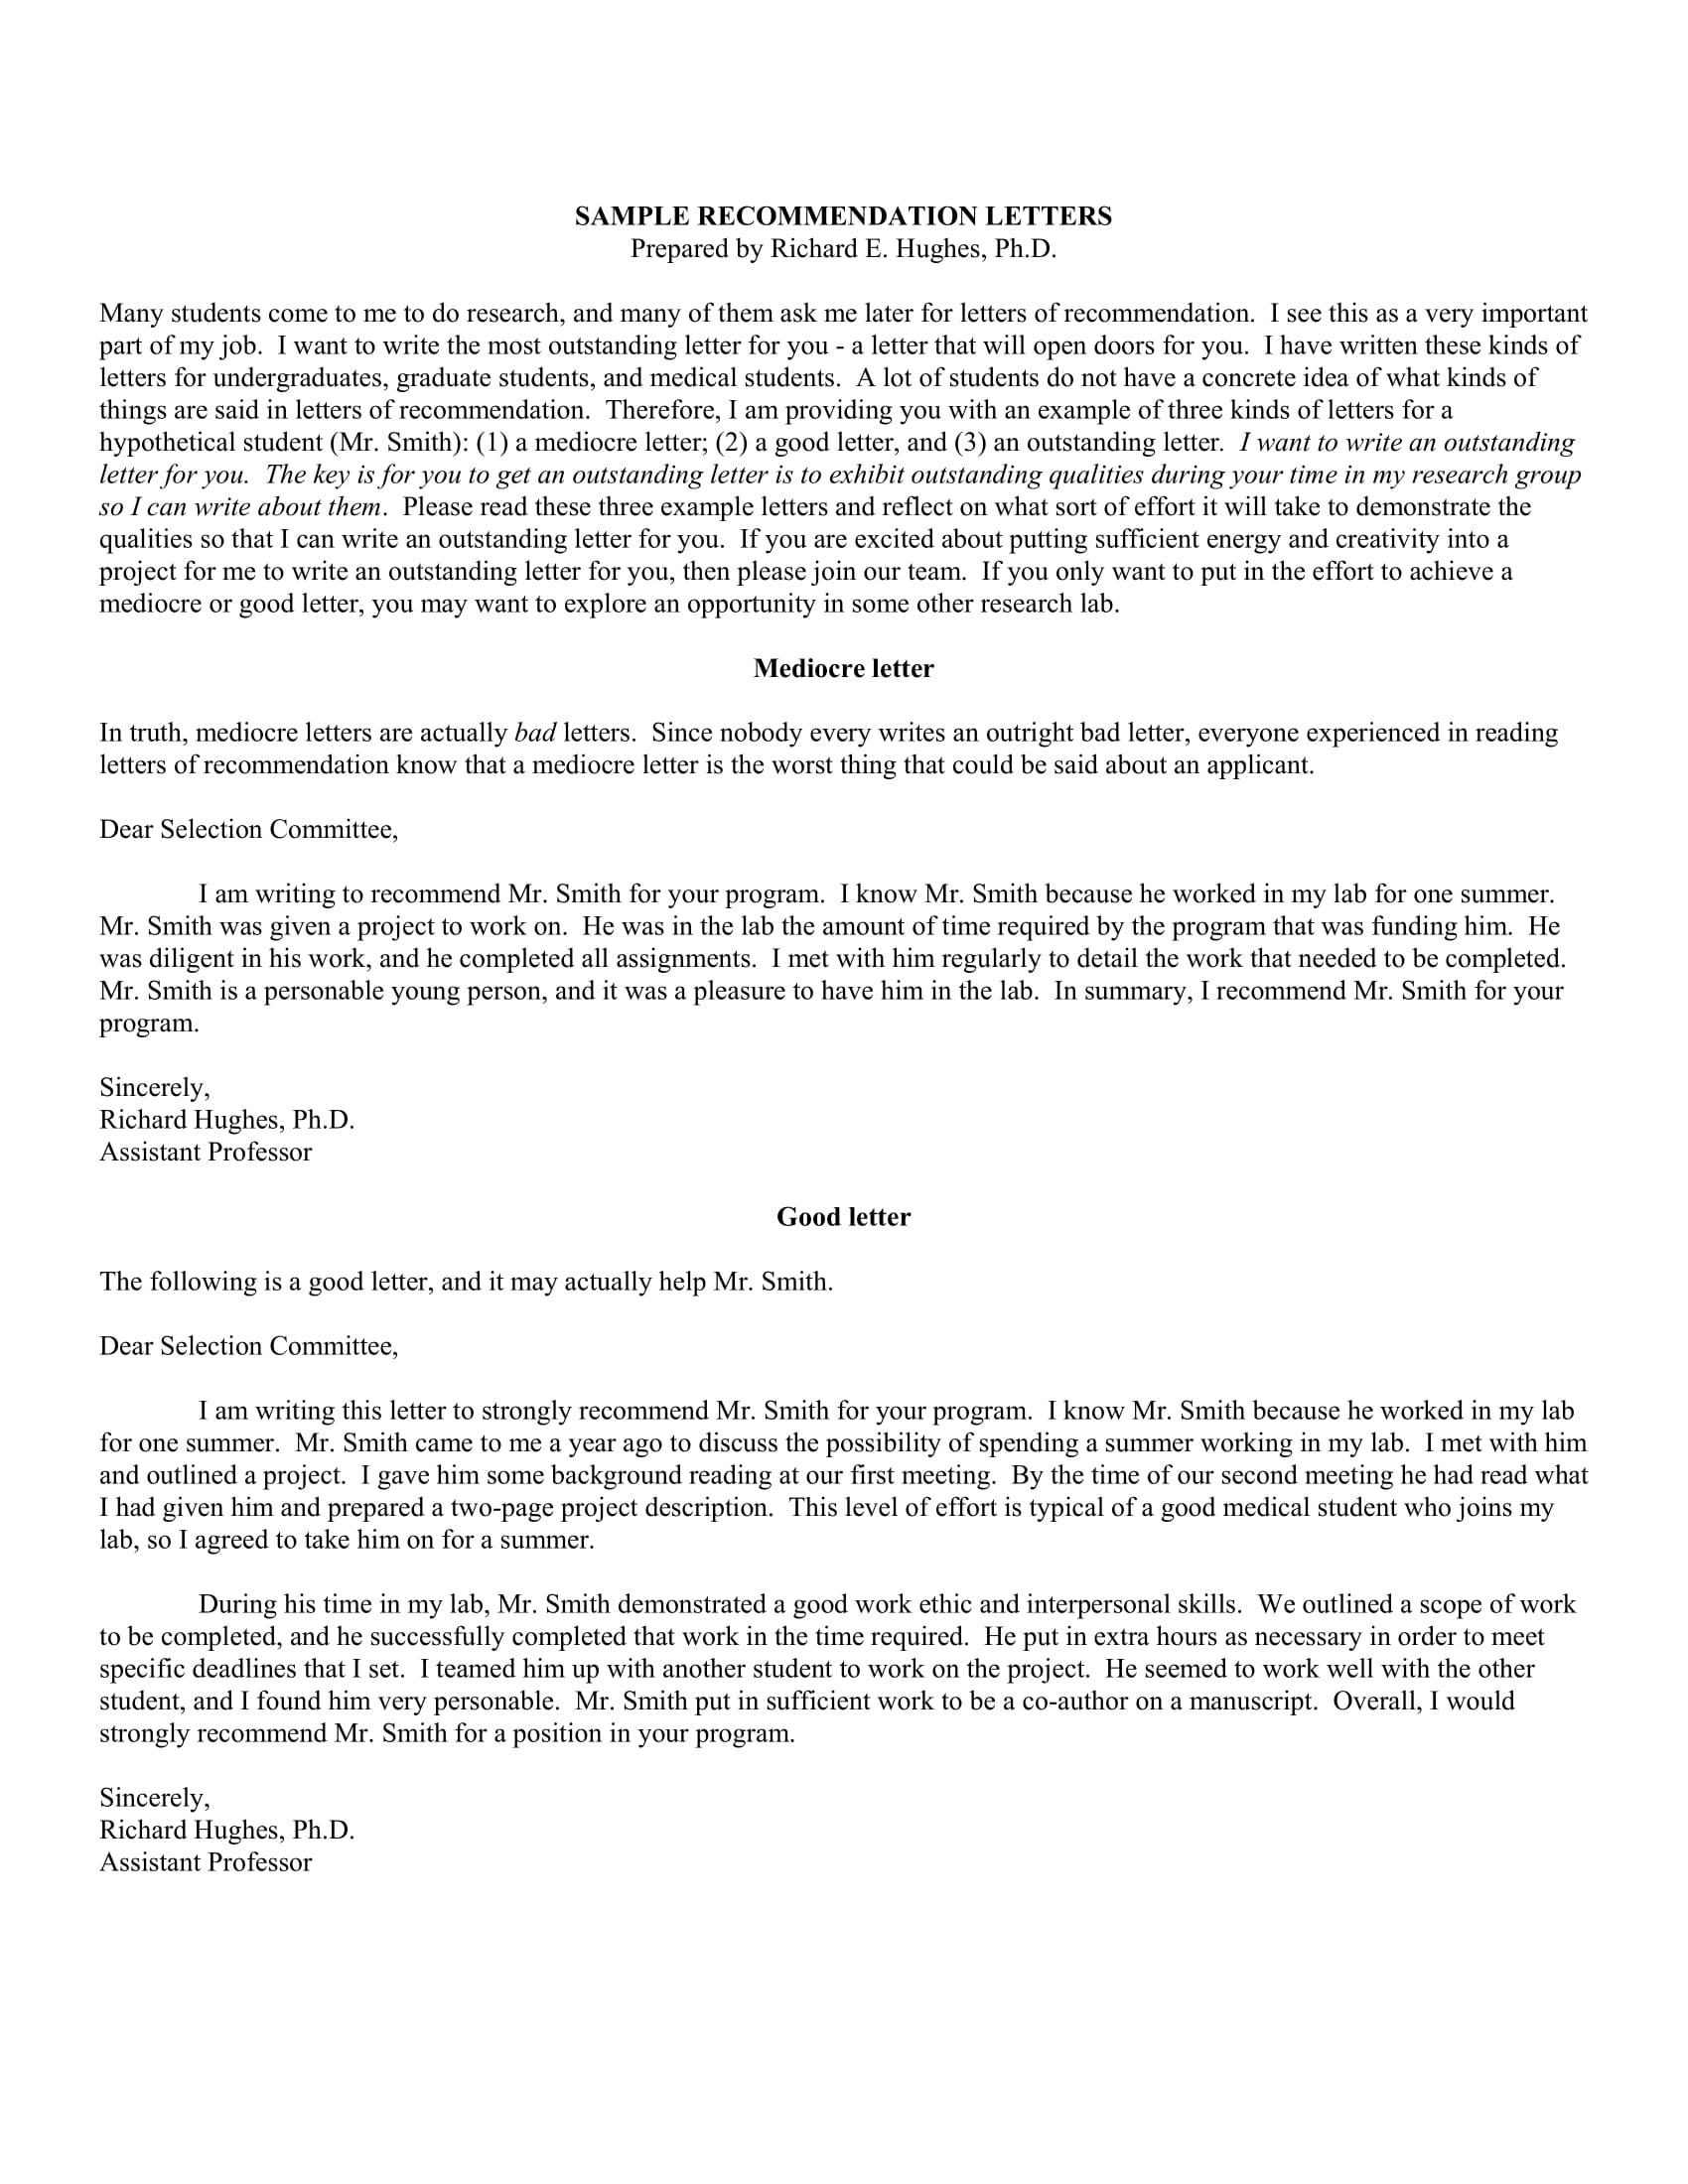 Sample Personal Recommendation Letter from images.examples.com